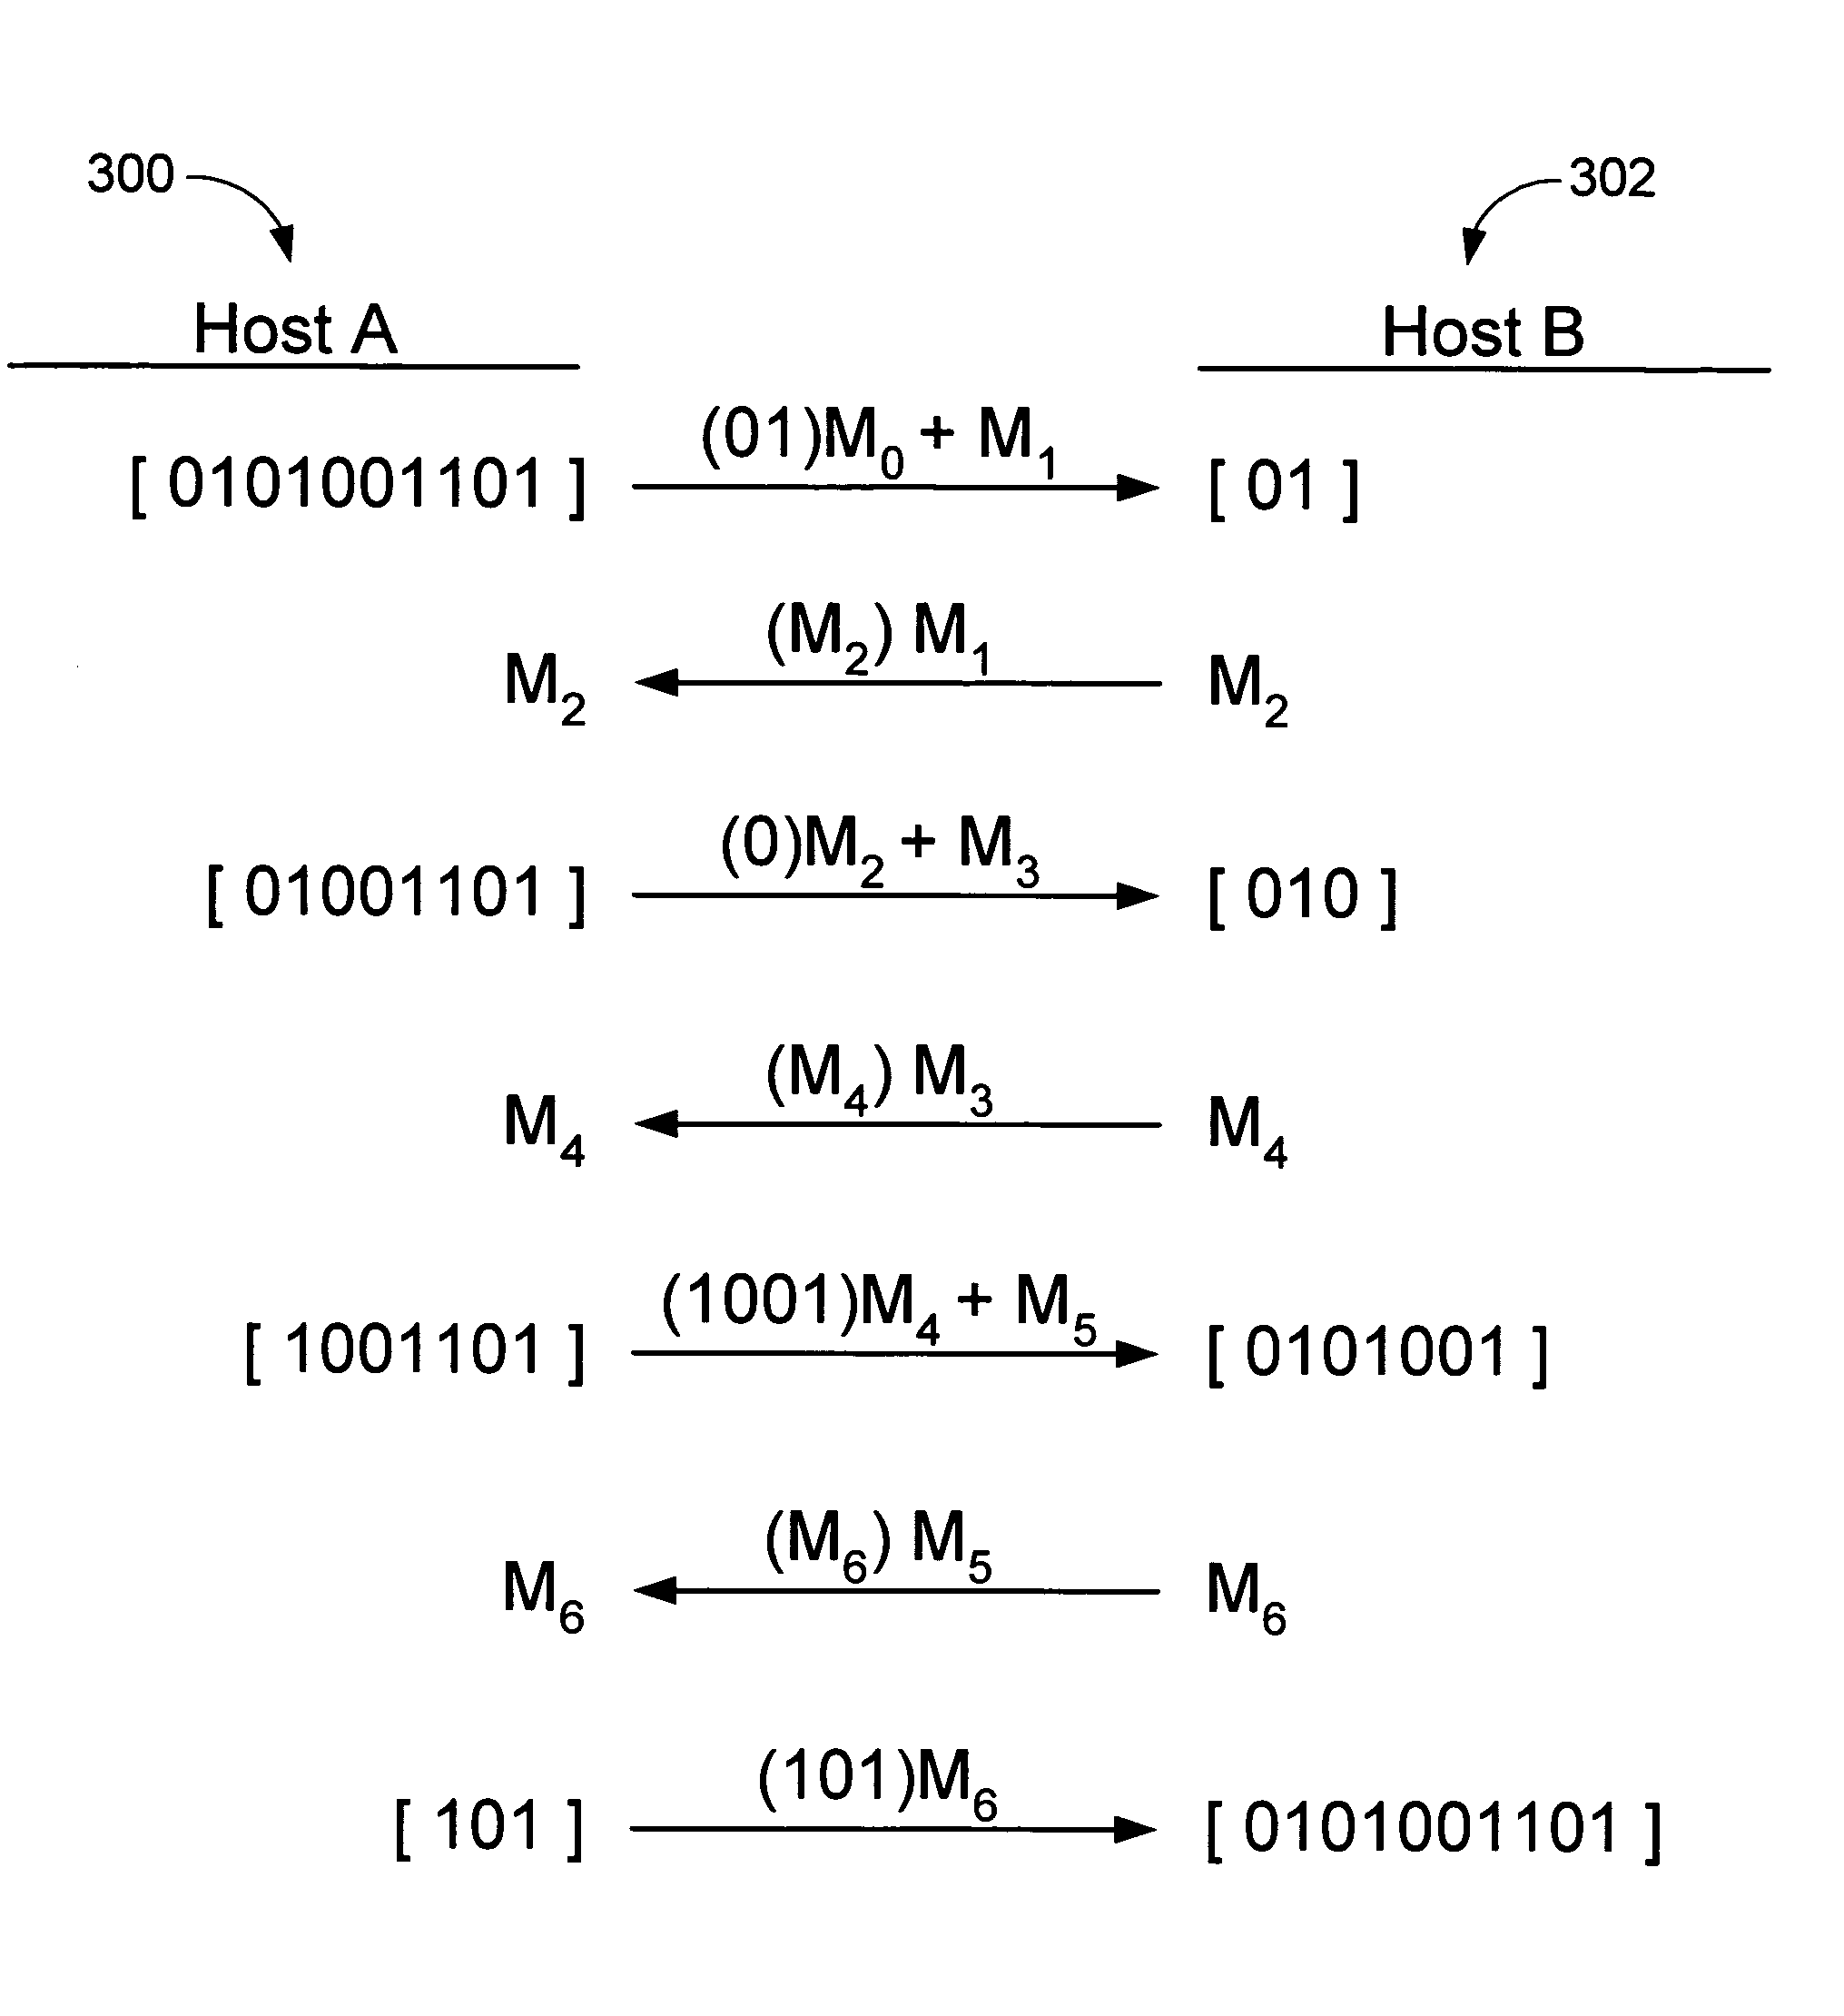 Domino scheme for wireless cryptographic communication and communication method incorporating same